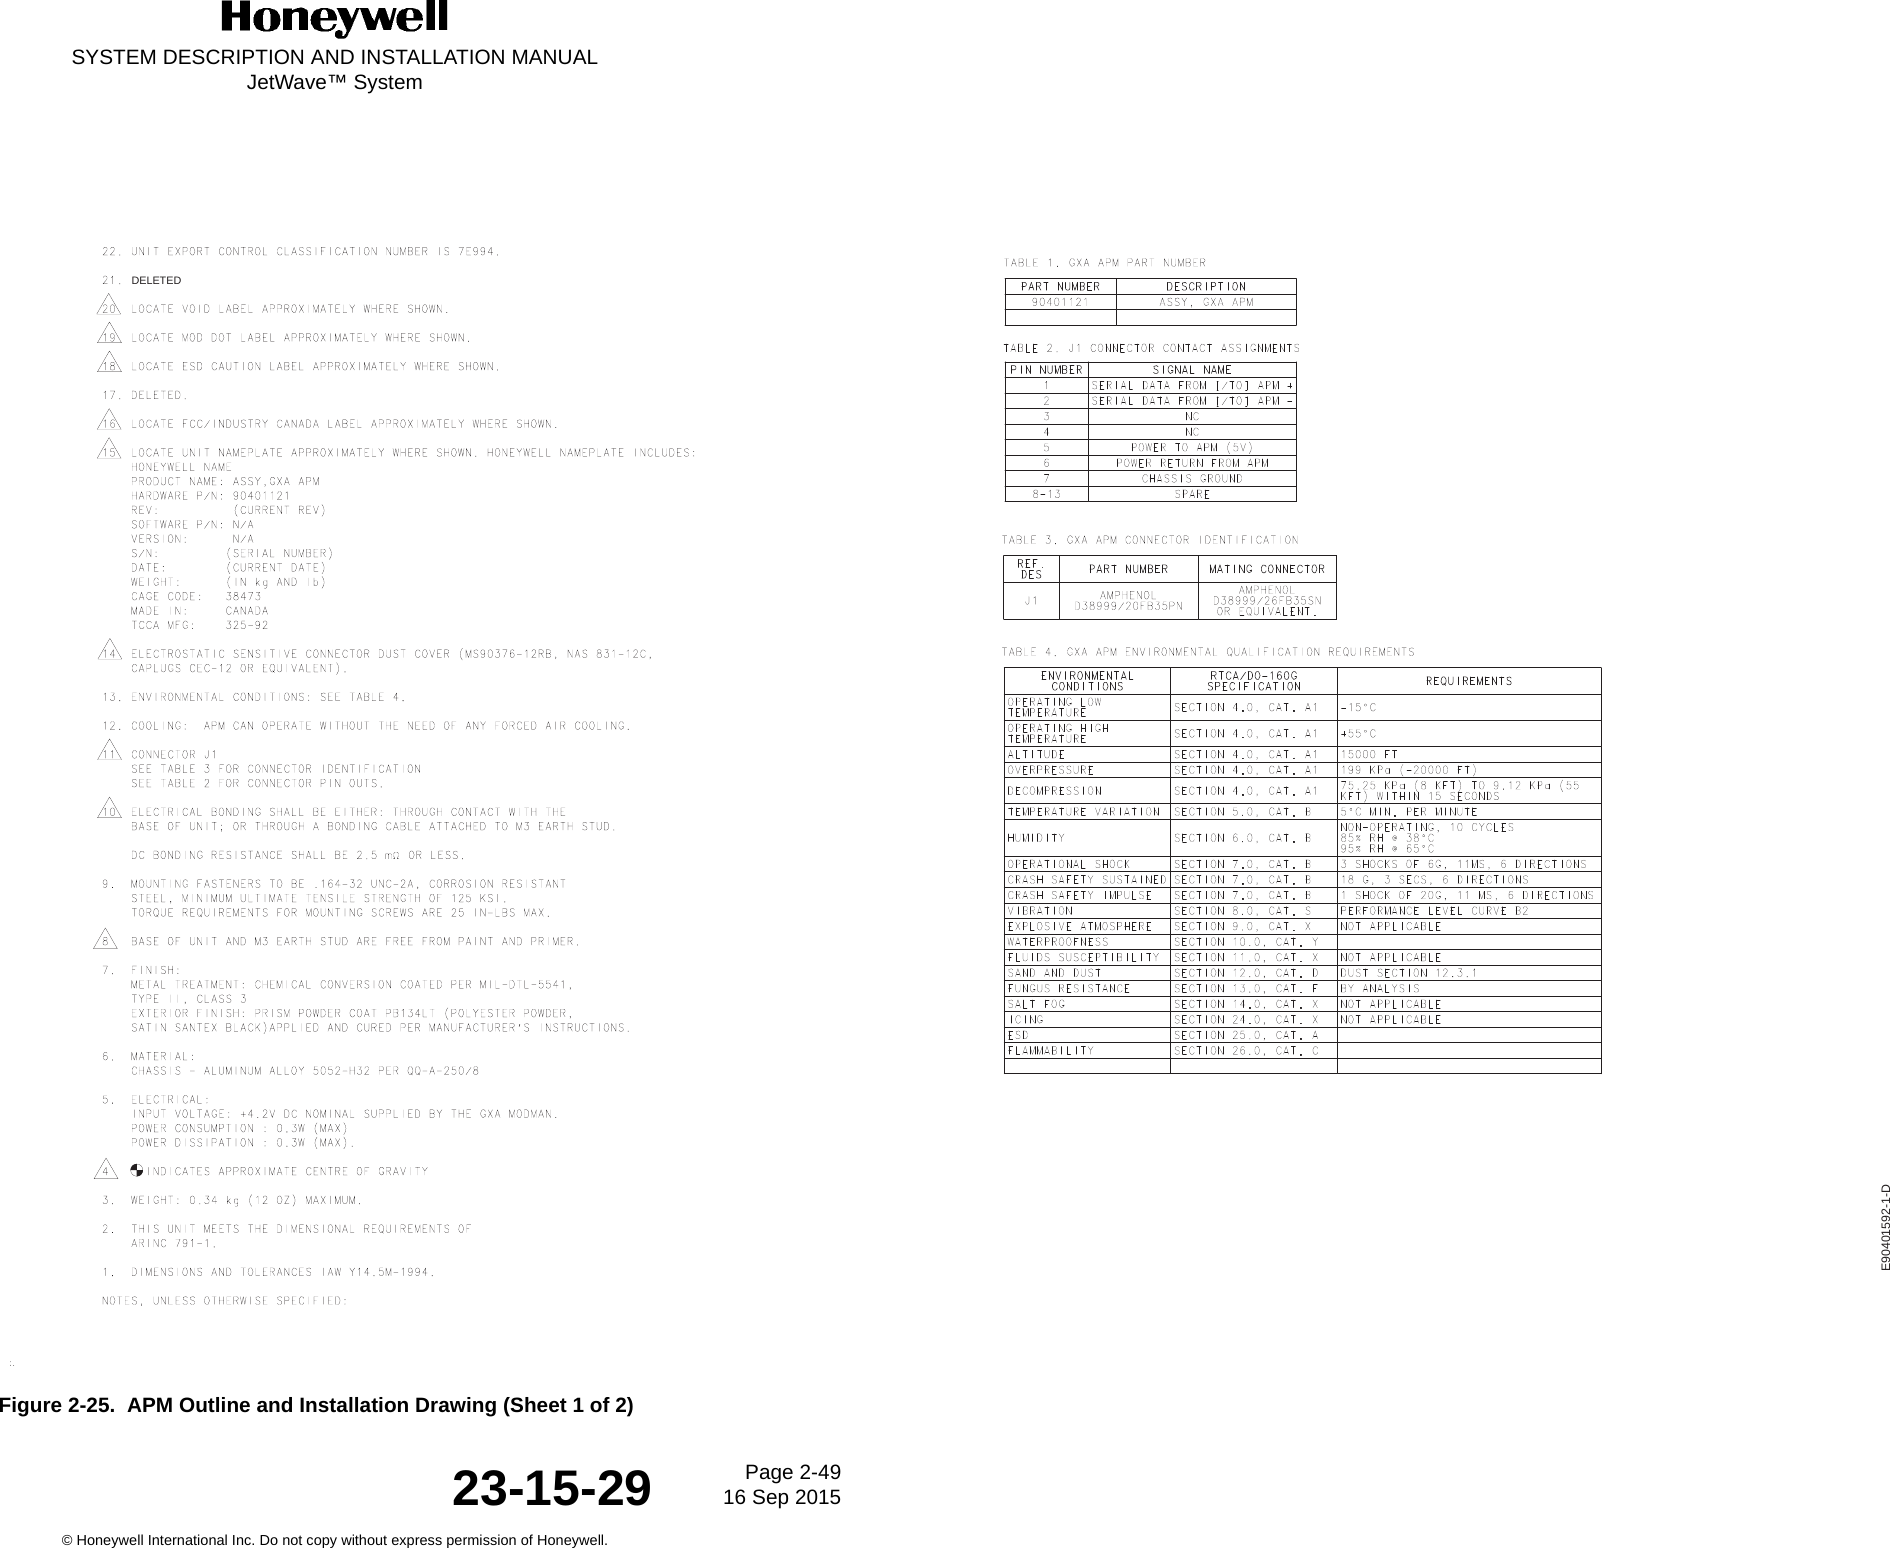 SYSTEM DESCRIPTION AND INSTALLATION MANUALJetWave™ SystemPage 2-49 16 Sep 2015© Honeywell International Inc. Do not copy without express permission of Honeywell.23-15-29Figure 2-25.  APM Outline and Installation Drawing (Sheet 1 of 2)DELETEDE90401592-1-D